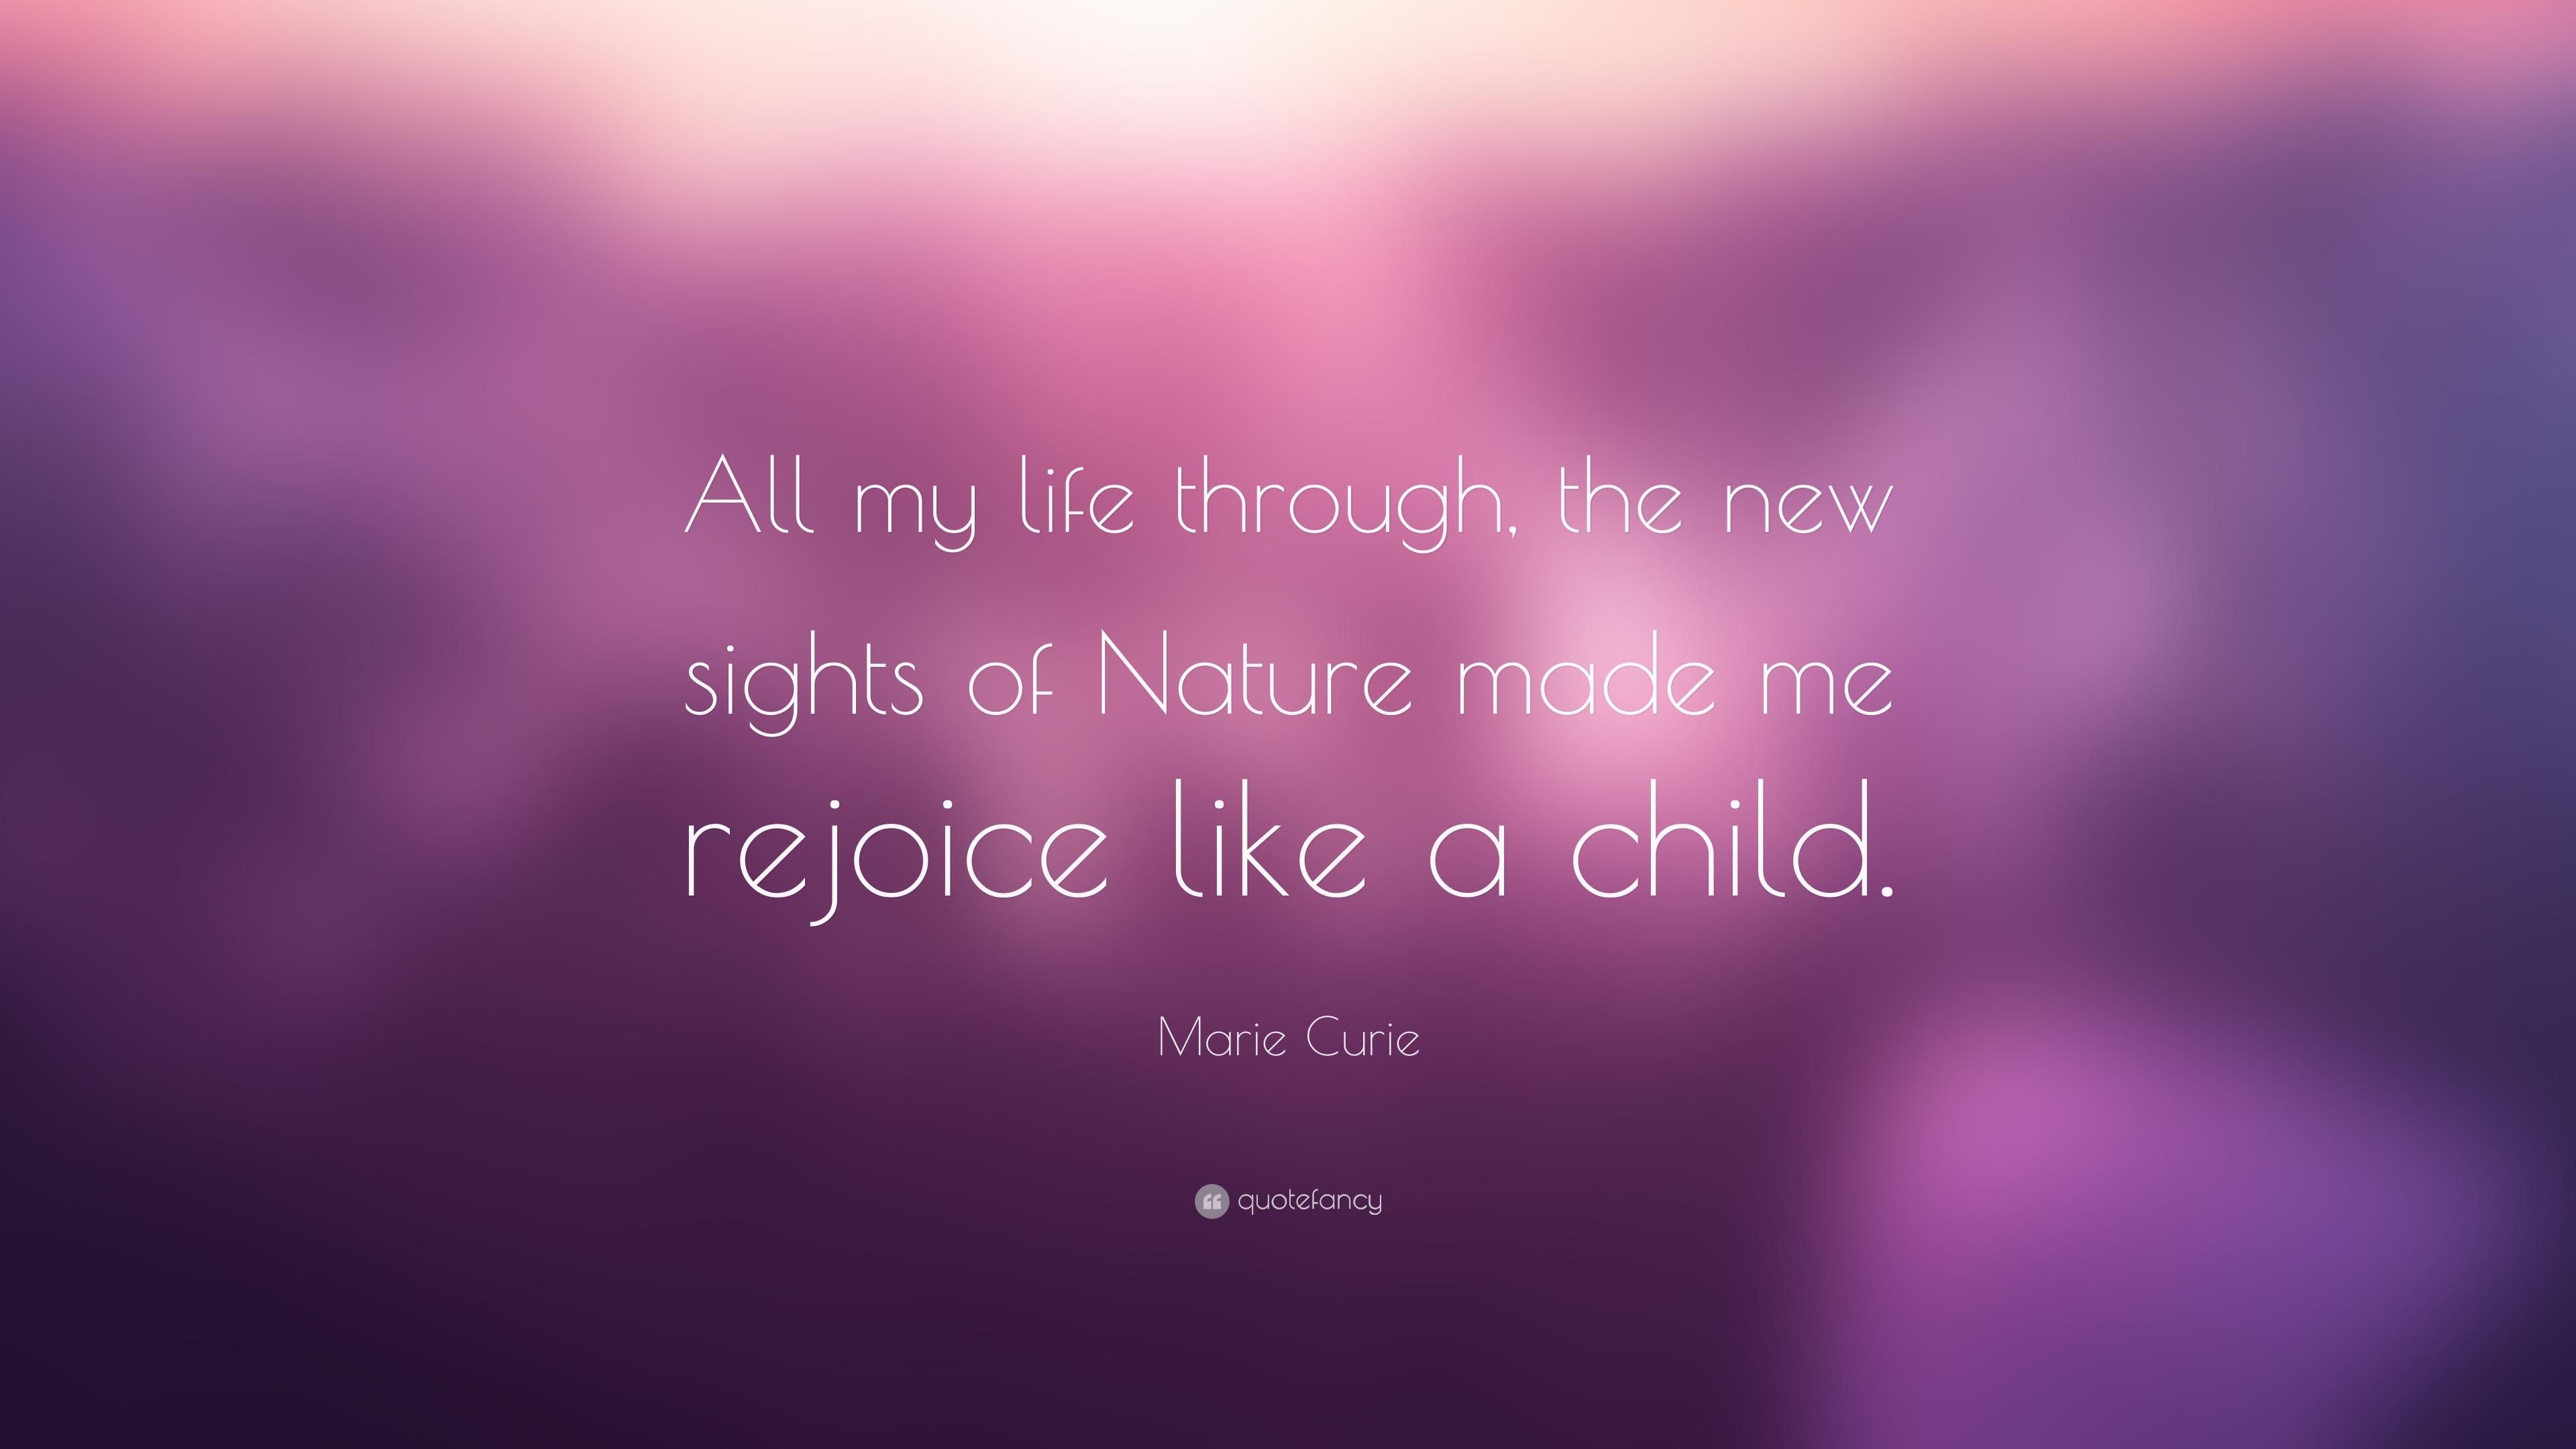 Marie Curie Quote: “All my life through, the new sights